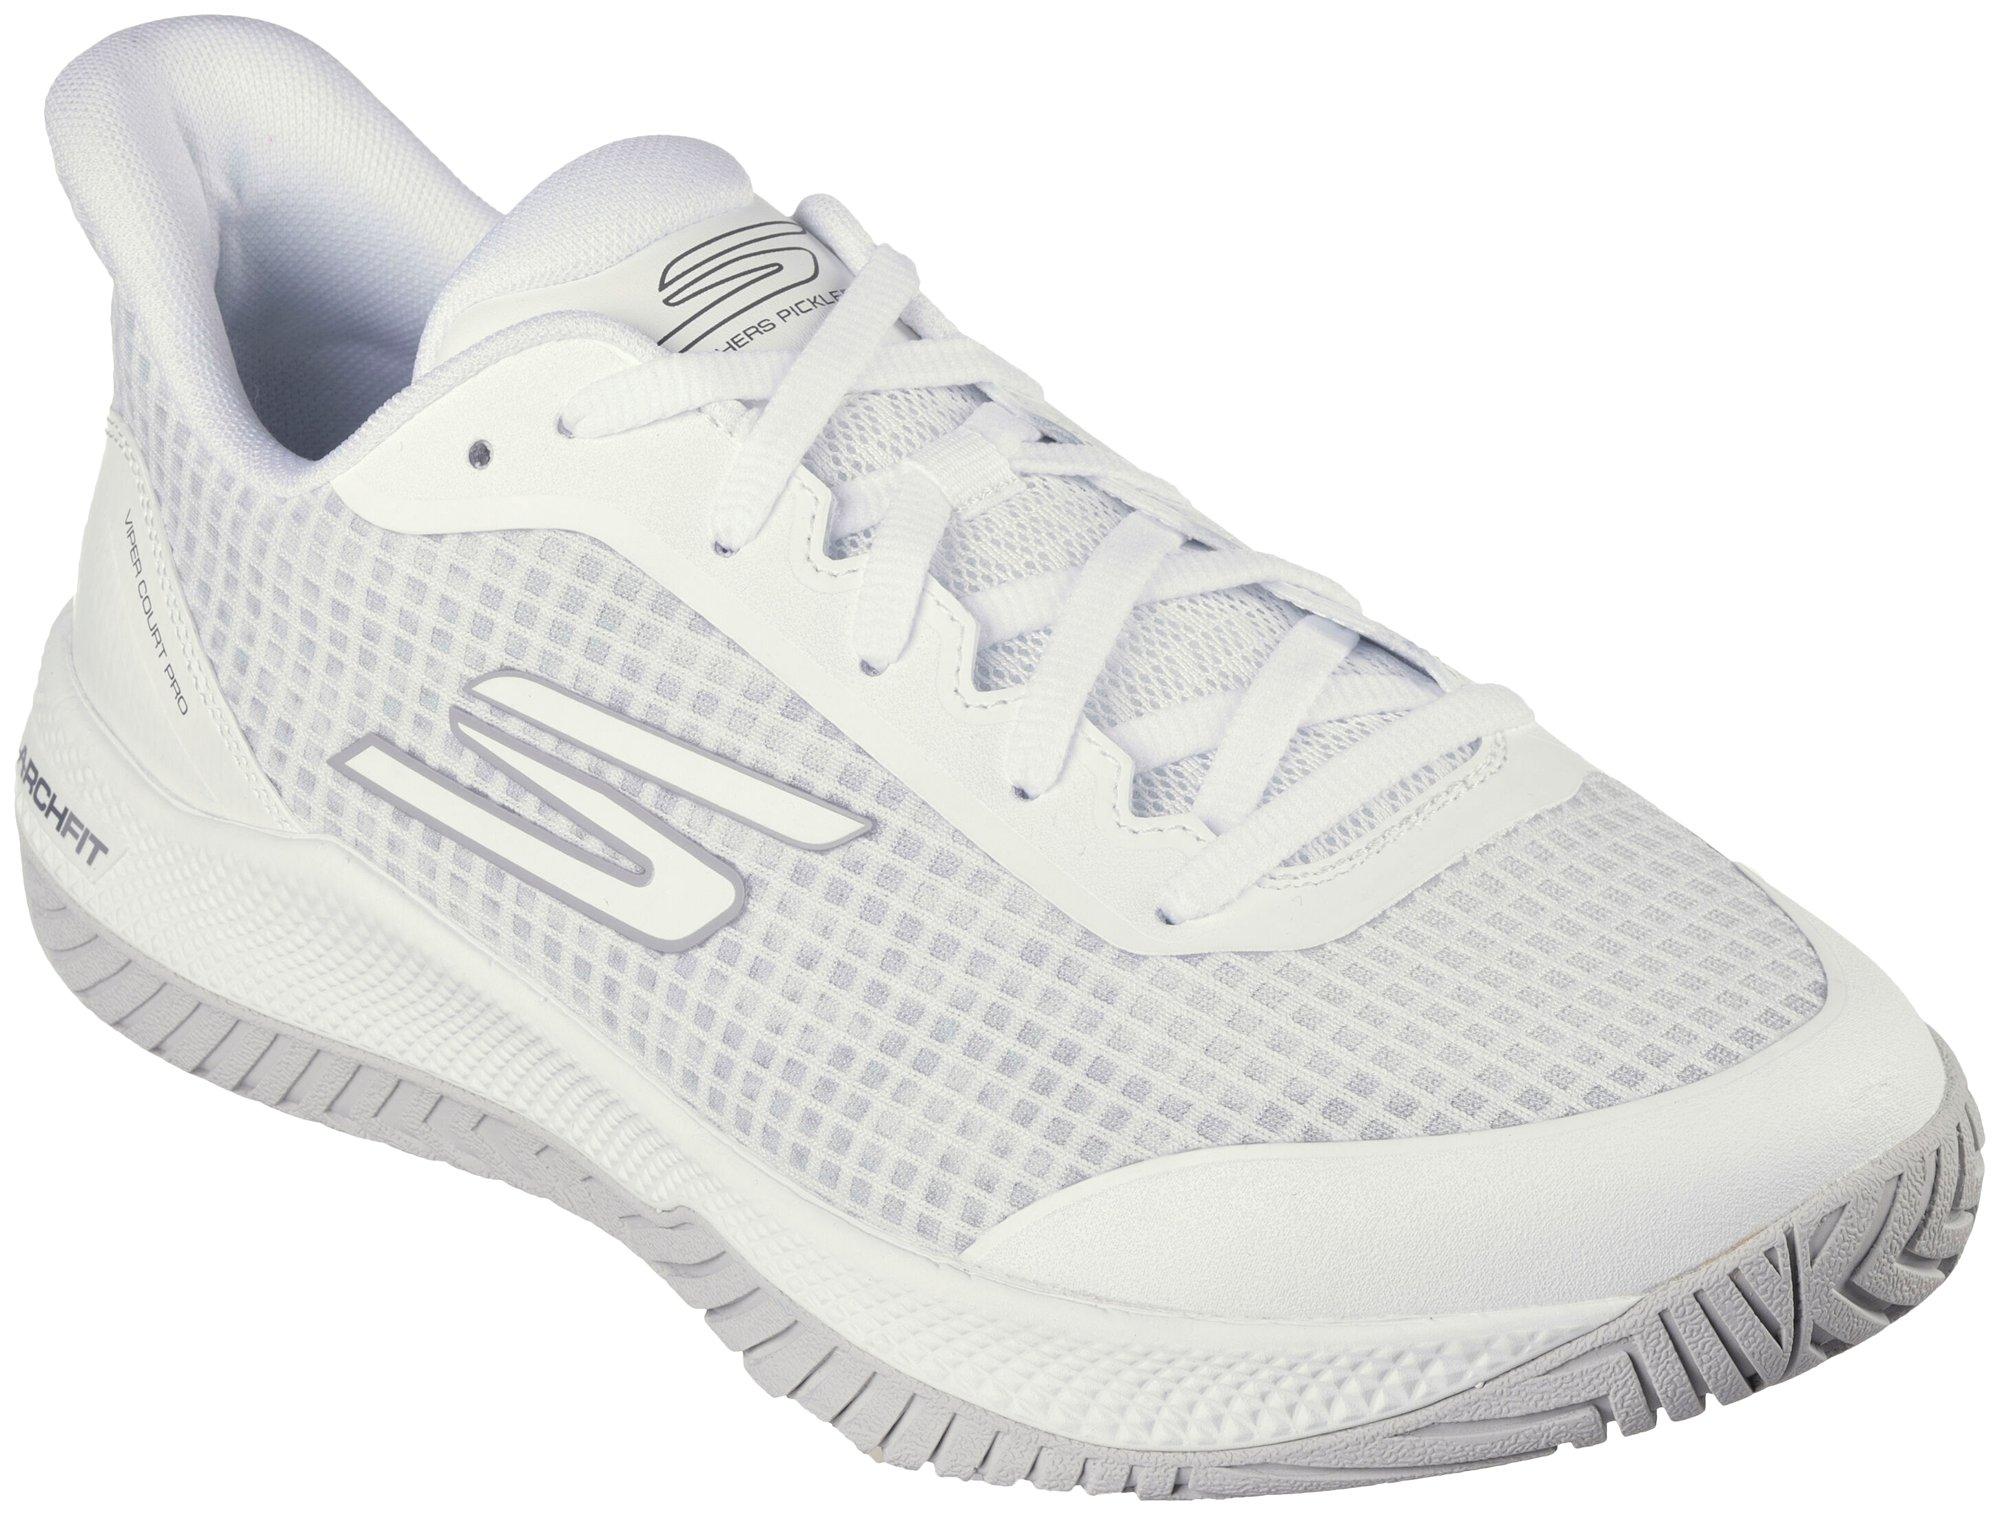 Mens Viper Court Pro Pickleball Arch Fit Shoes